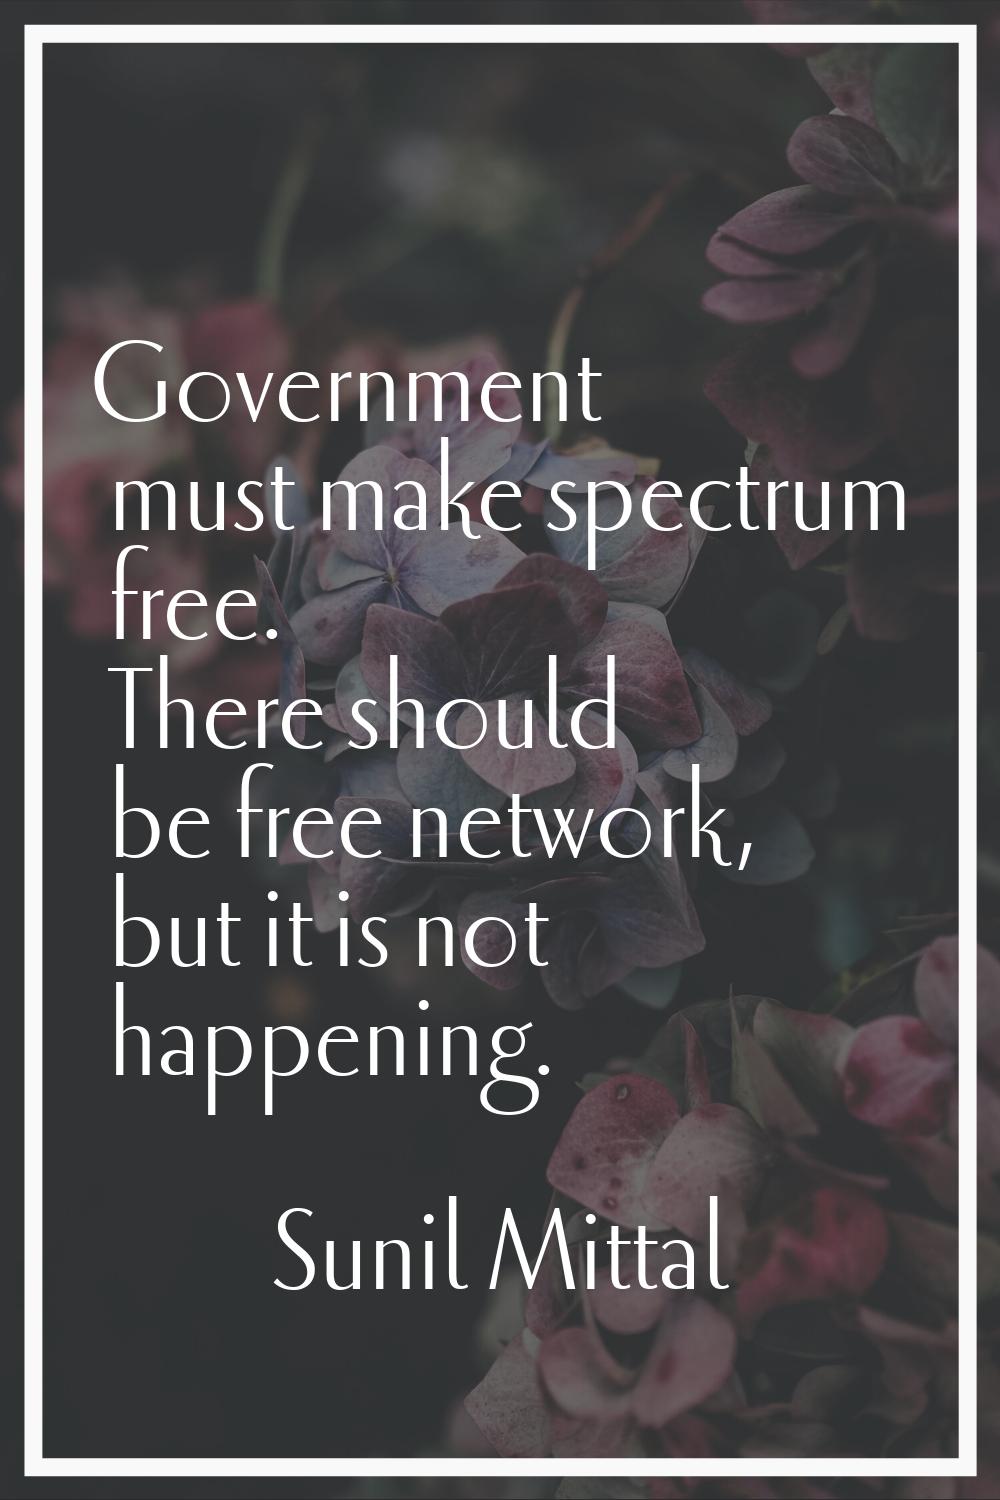 Government must make spectrum free. There should be free network, but it is not happening.